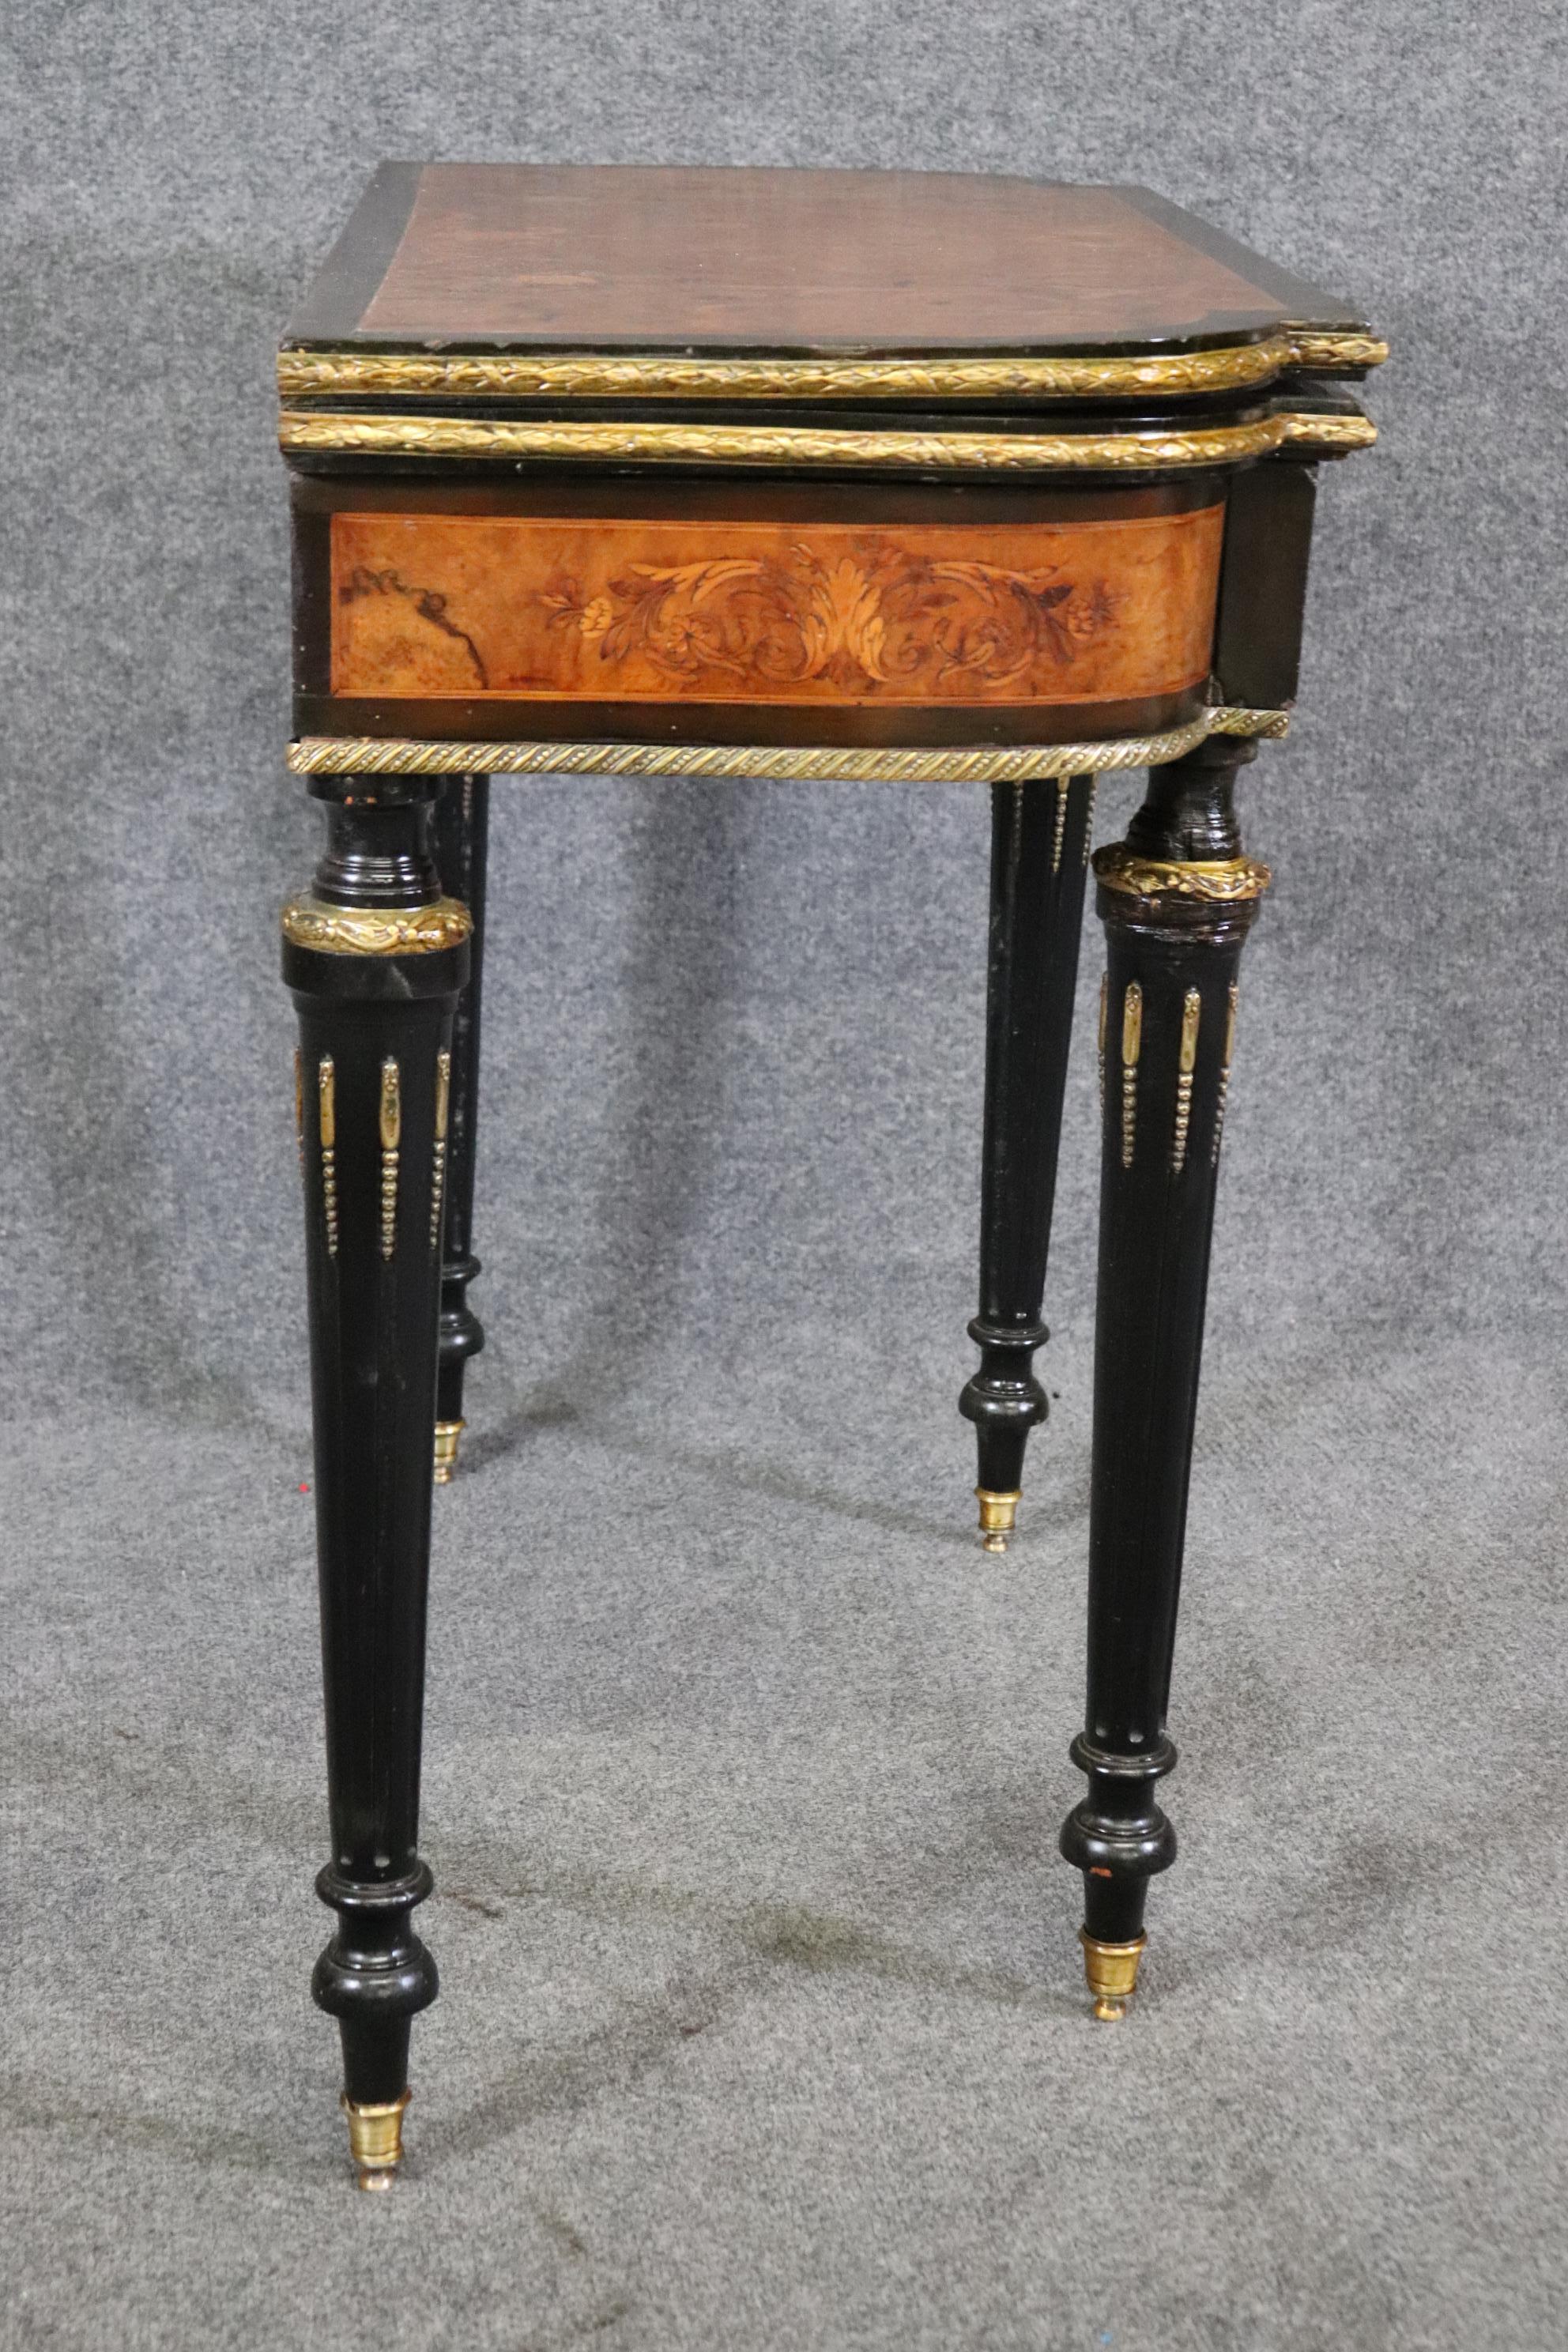 Superb Bronze Mounted Inlaid Walnut Ebonized French Games Table Circa 1870 For Sale 3